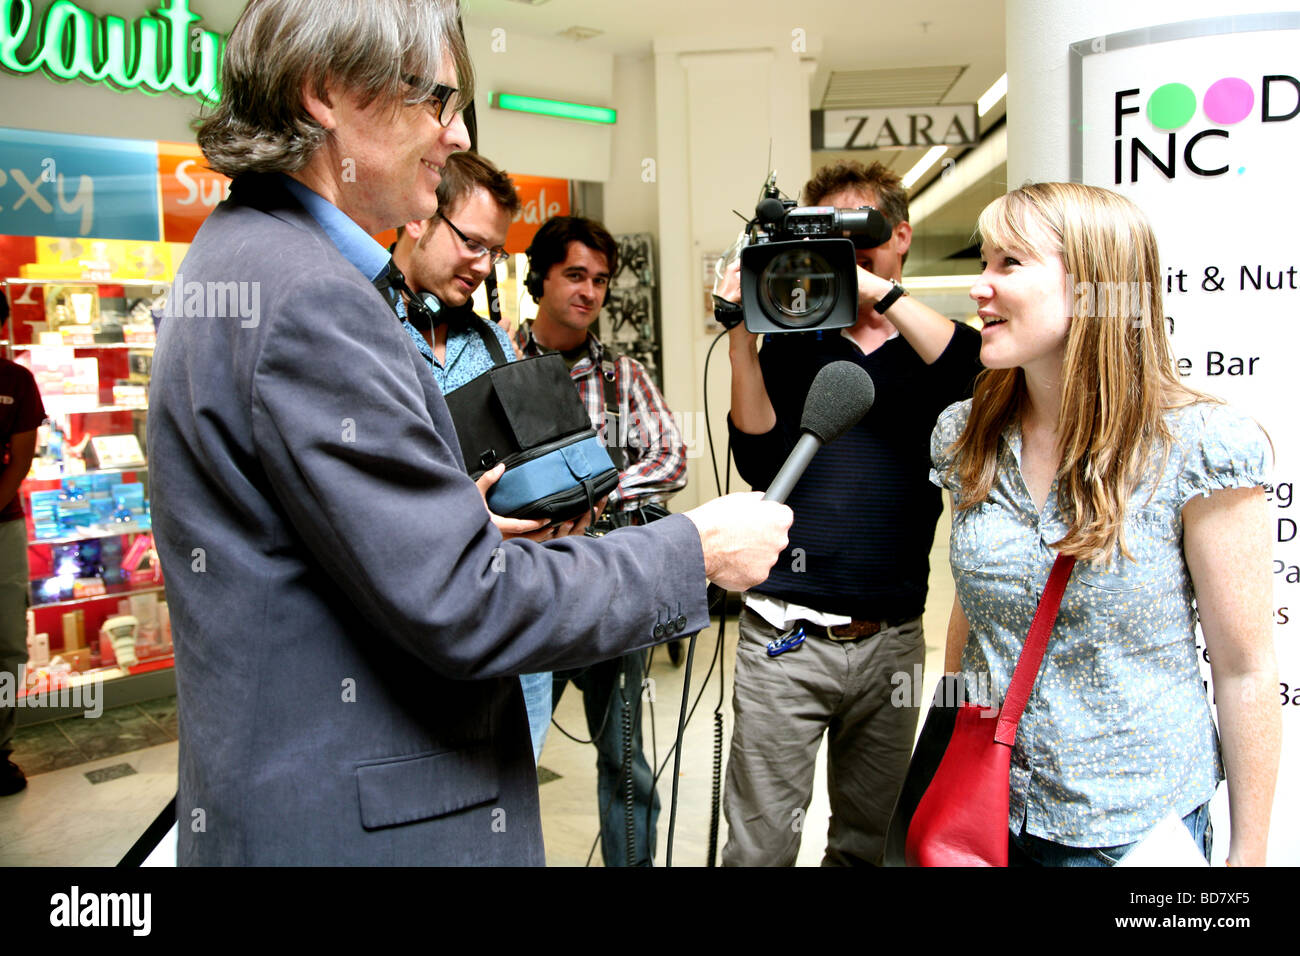 Television crew interviews people in London shopping centre Stock Photo